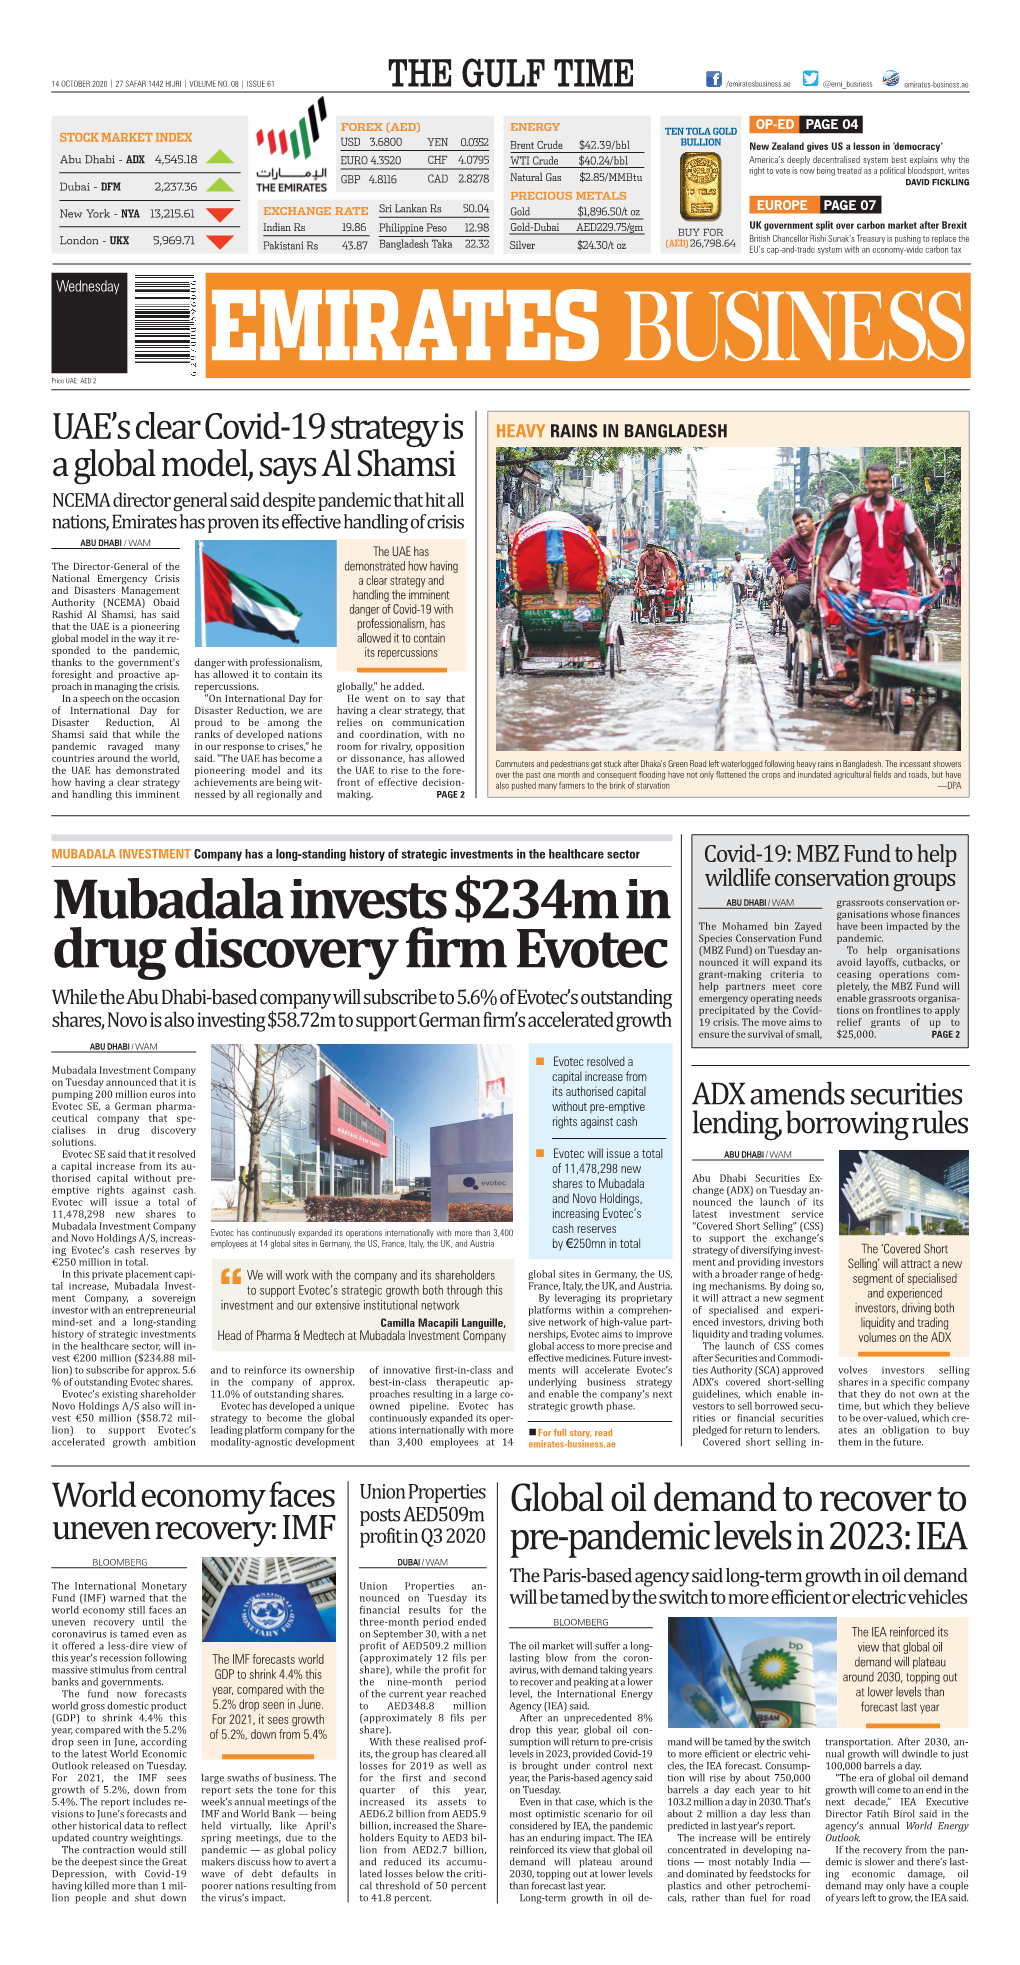 Mubadala Invests $234M in Drug Discovery Firm Evotec